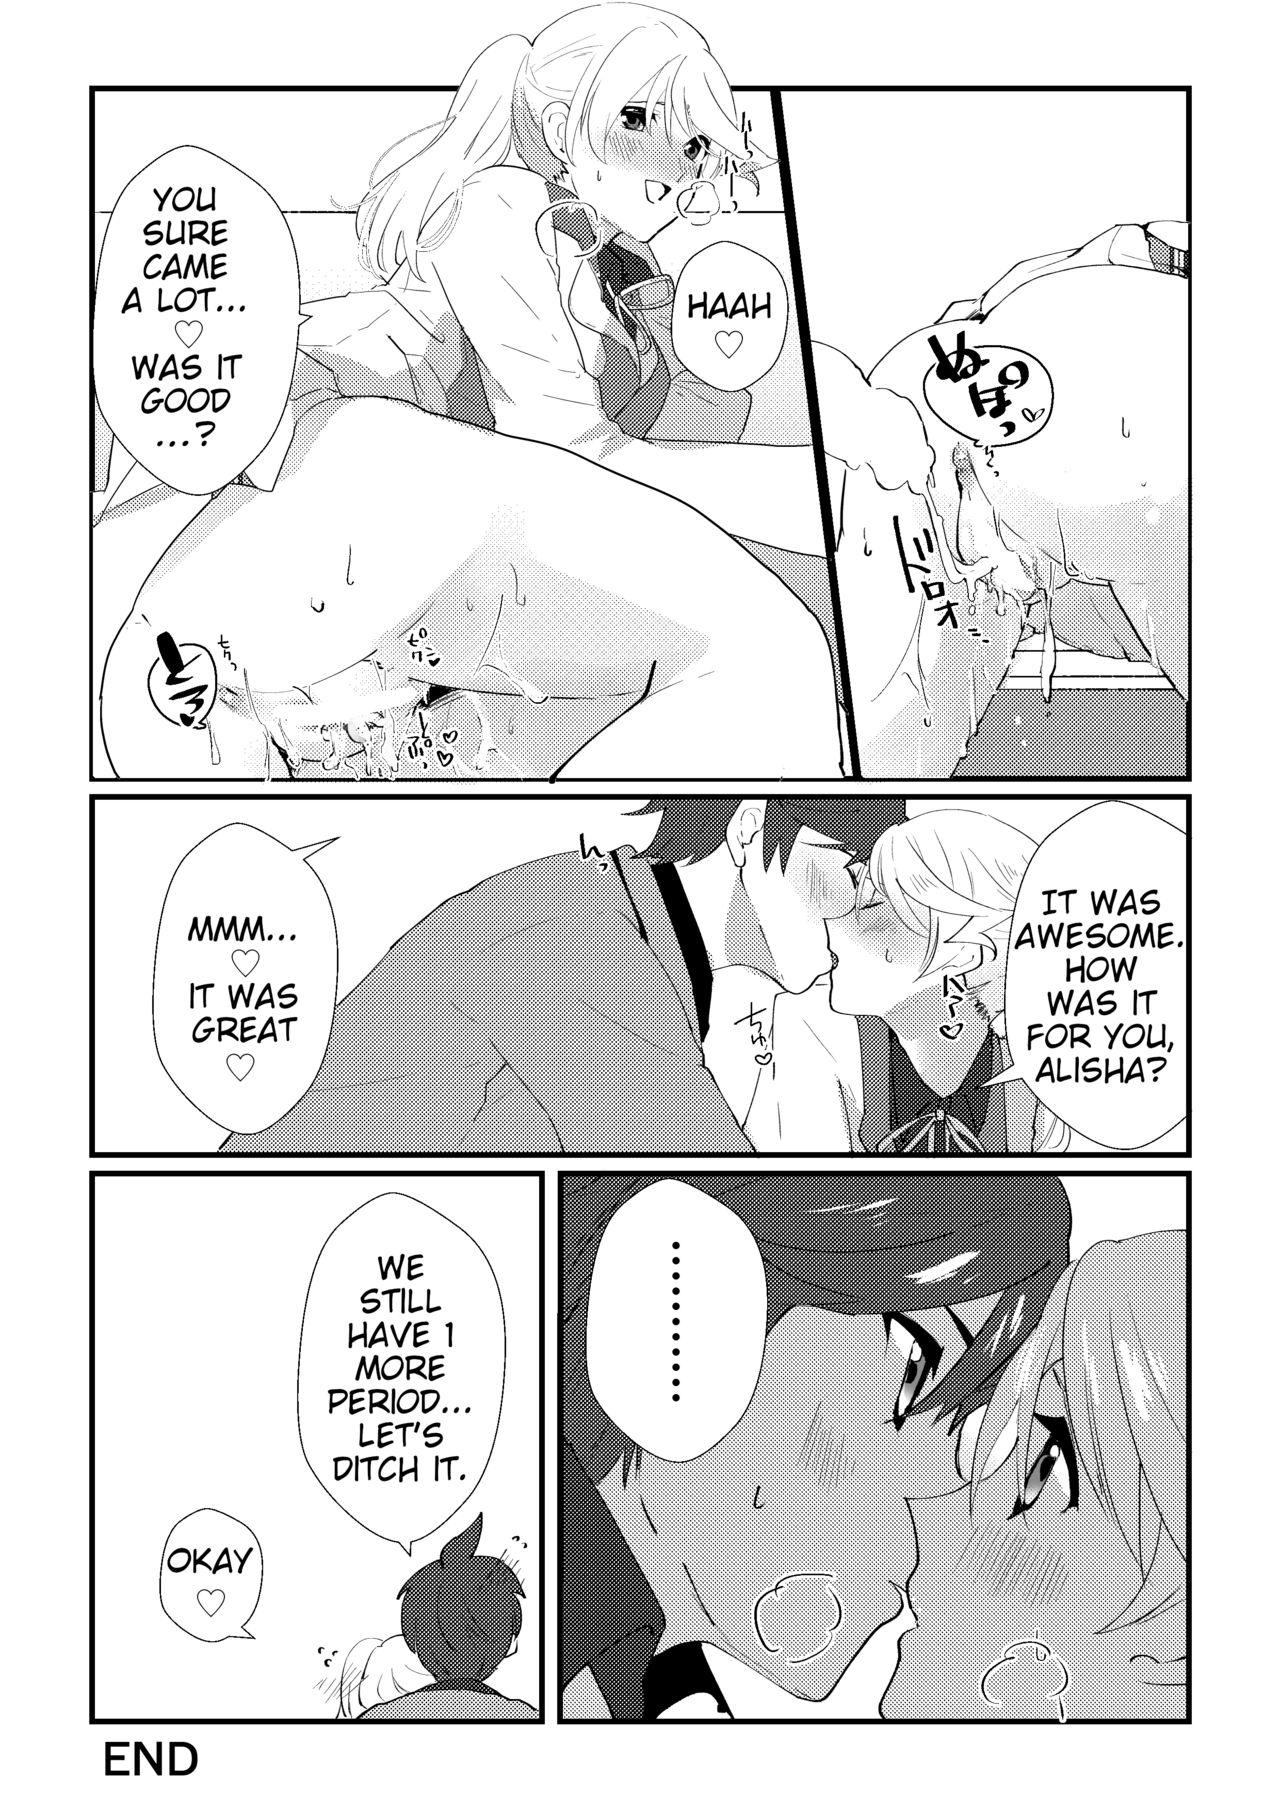 Hole crazy about you - Tales of zestiria Mamada - Page 10